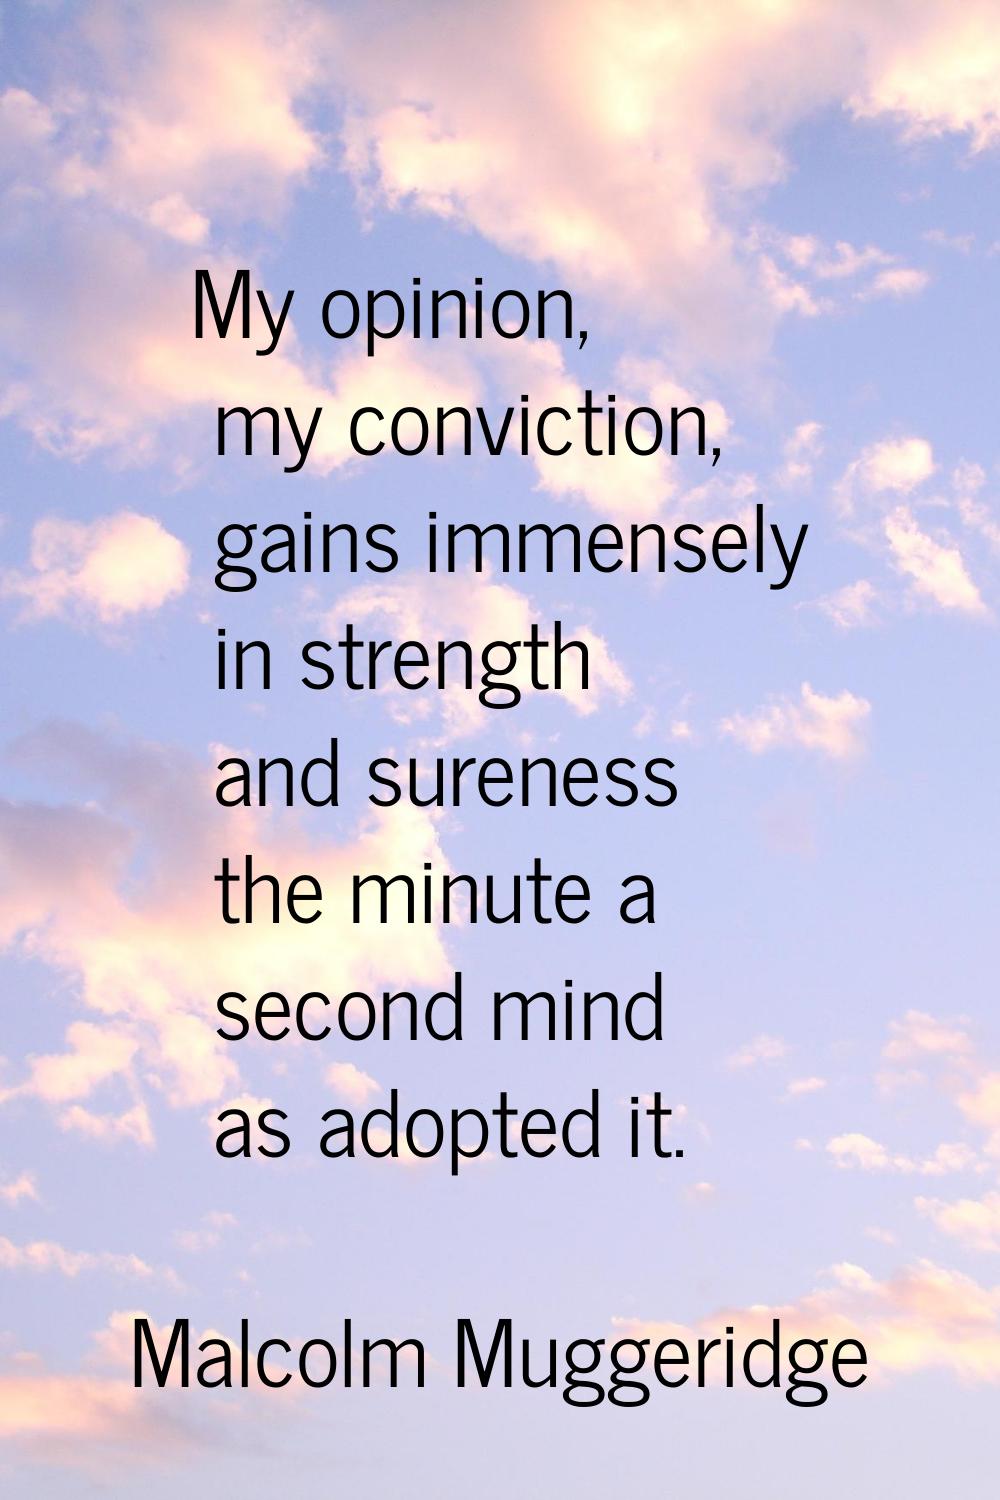 My opinion, my conviction, gains immensely in strength and sureness the minute a second mind as ado